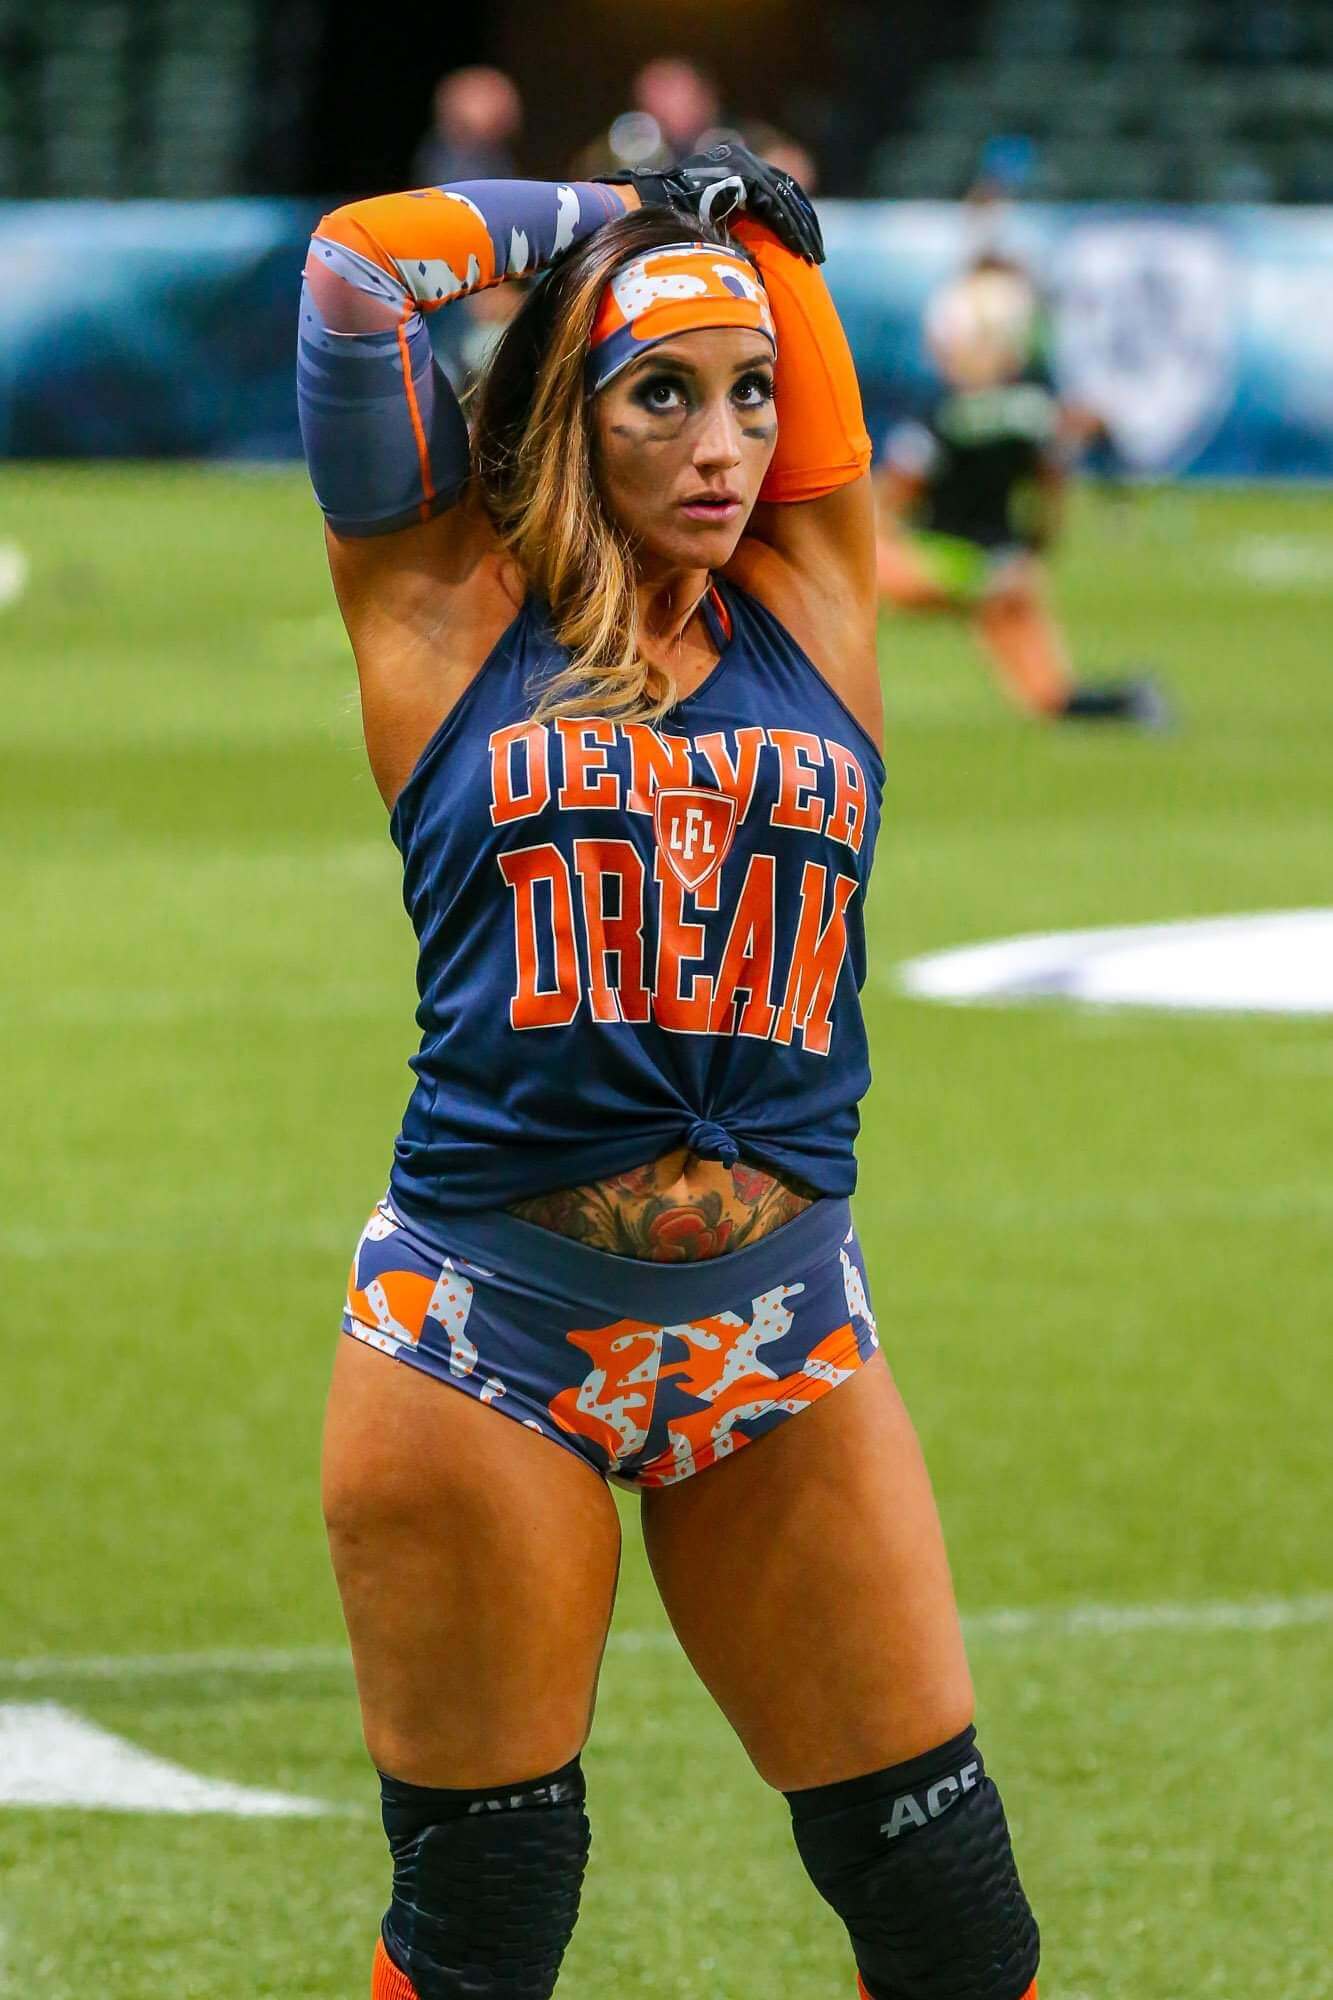 The Legends Football League Beautiful Women And Football, Need We Say Anymore! 31